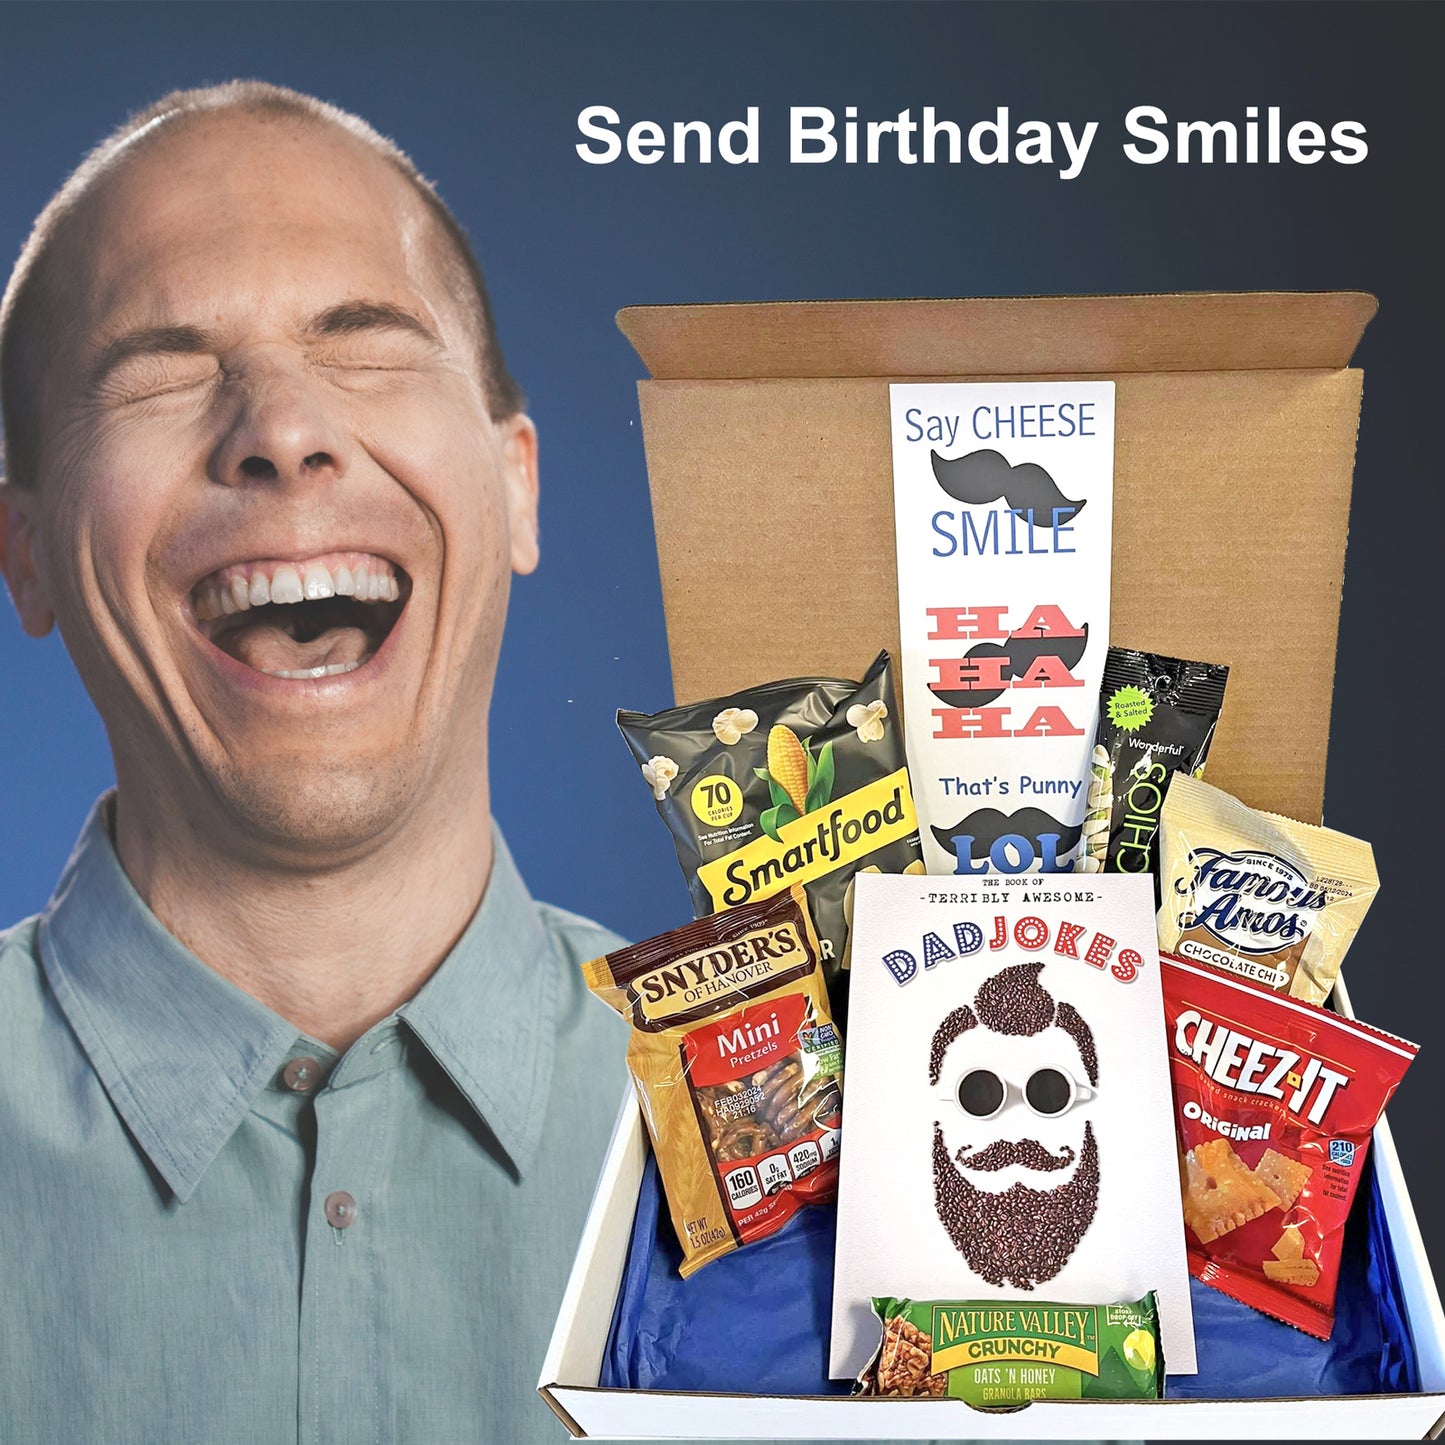 Dad Jokes Birthday Gift Box for Men Funny Men’s Birthday Gift with Joke Book and Snacks for His Birthday has Popcorn, Pretzels and Cookies for His Birthday Celebration